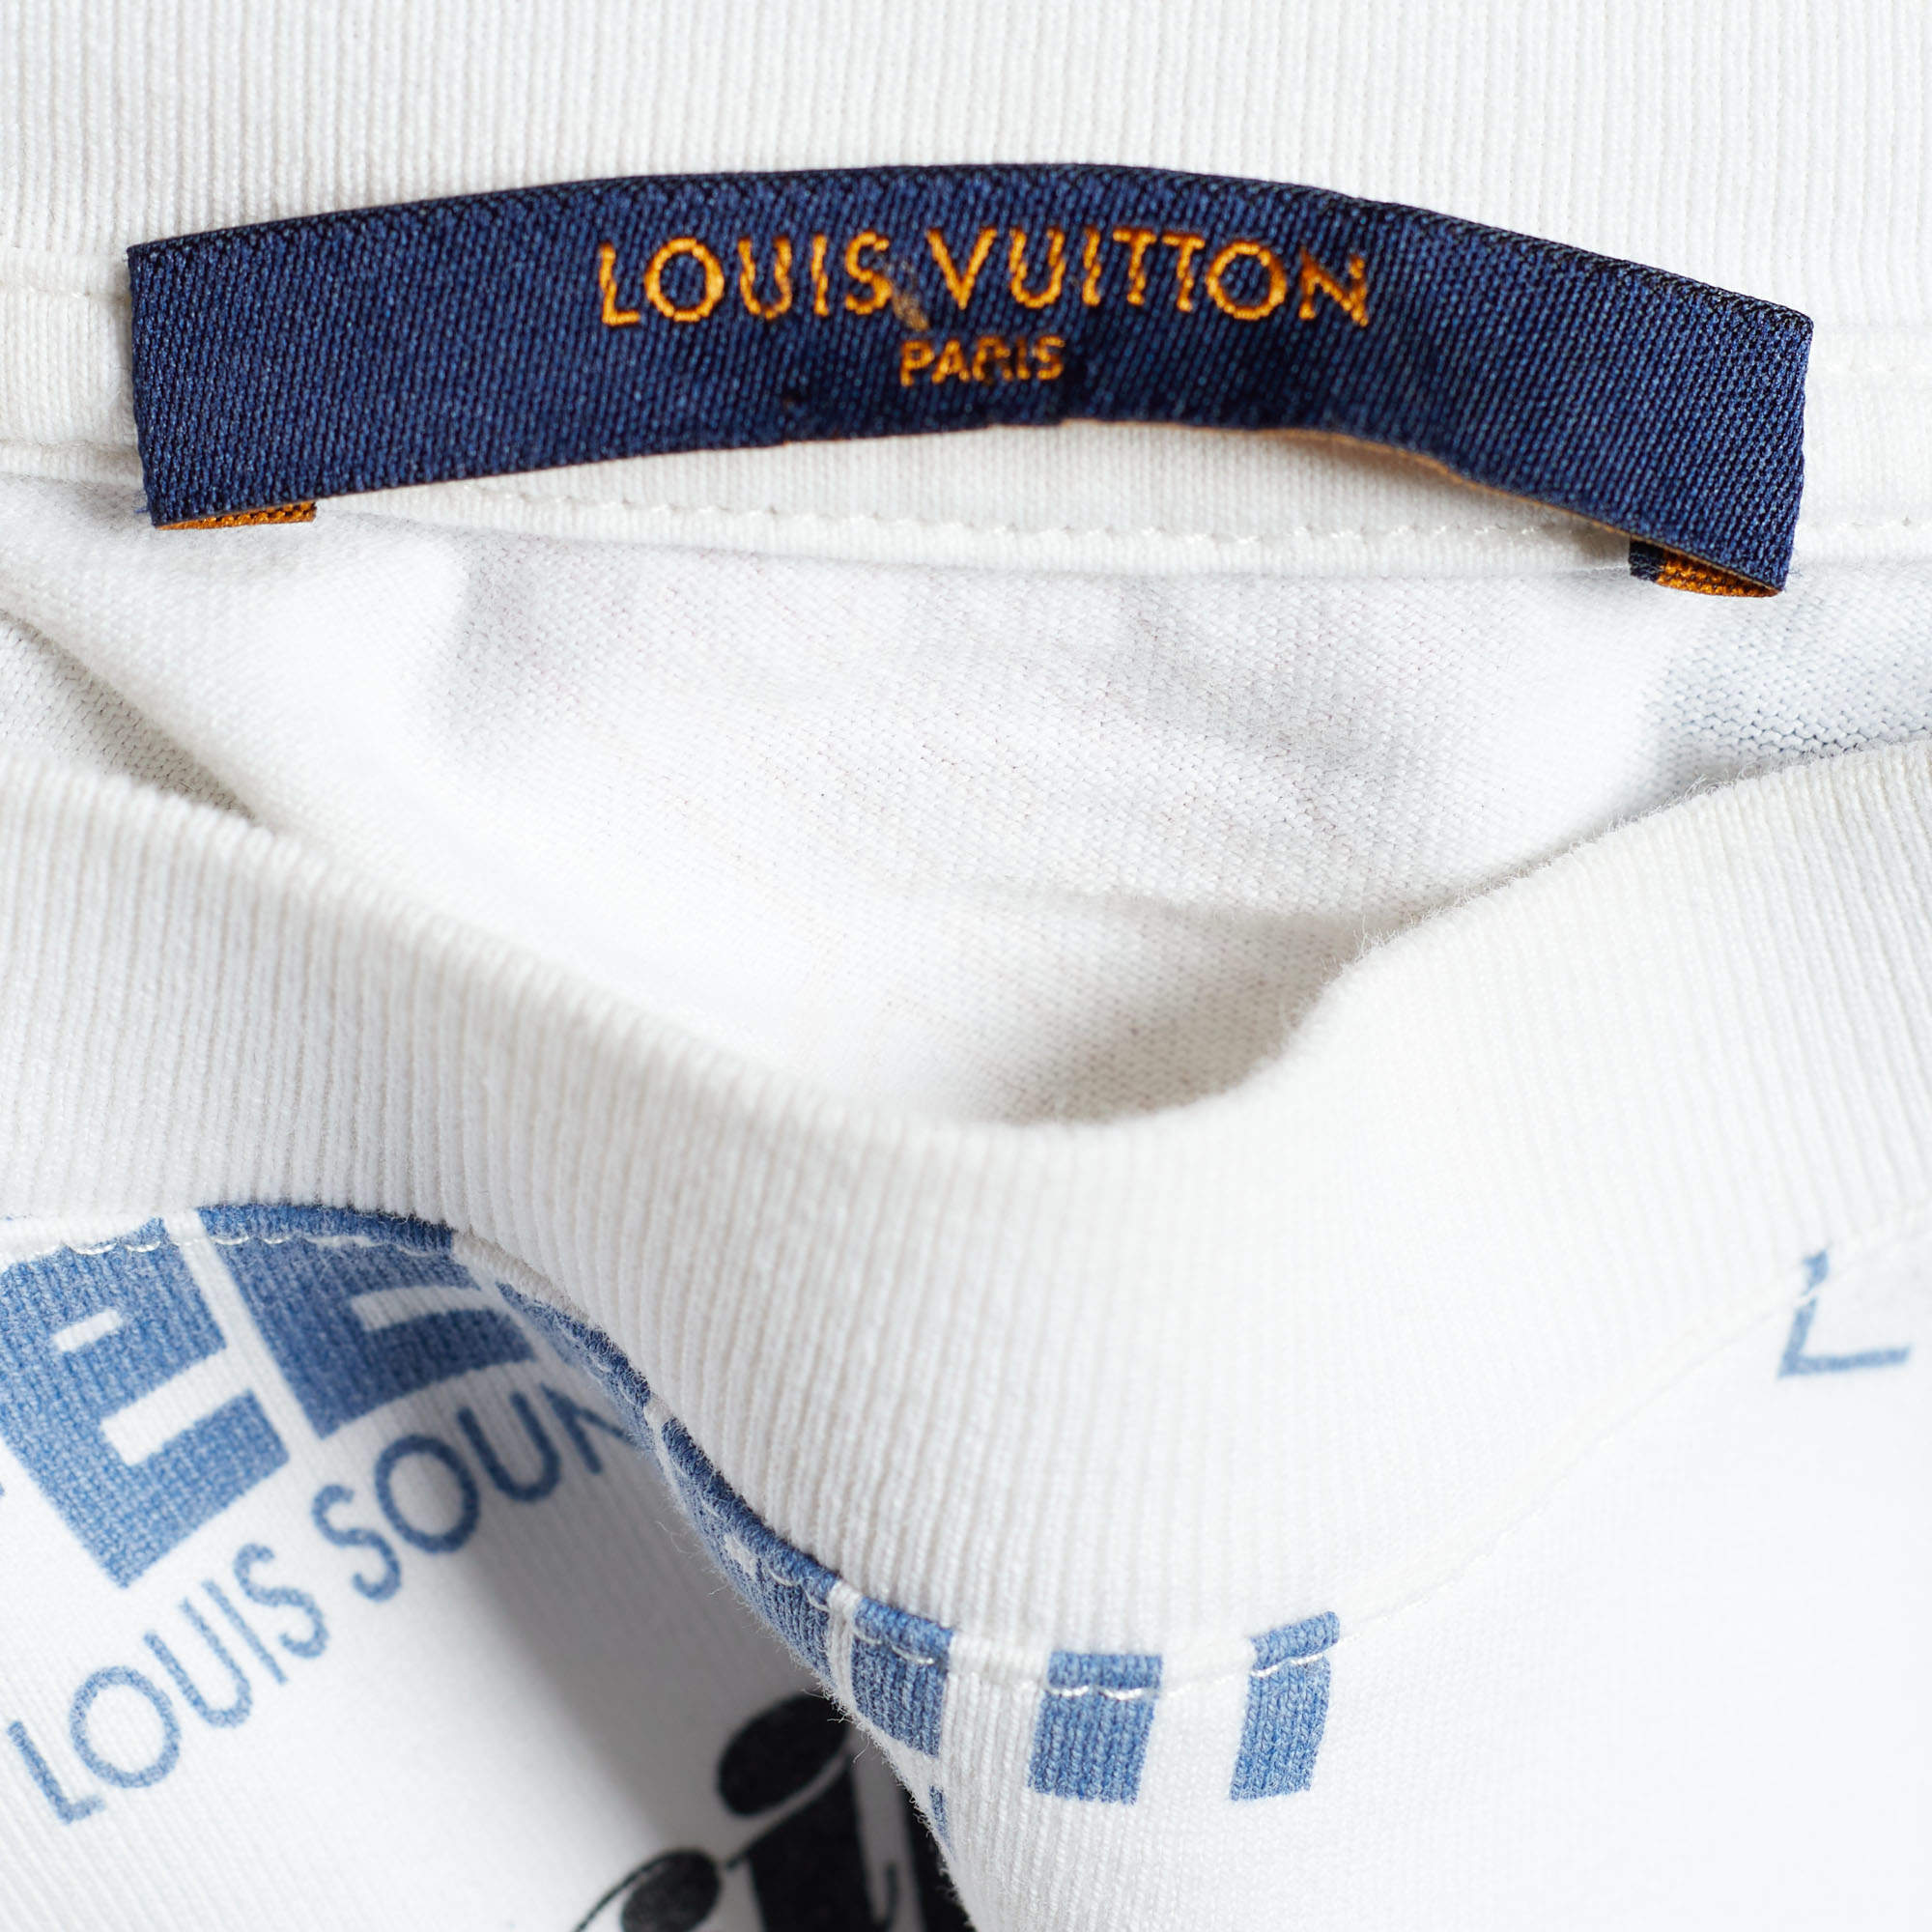 Louis Vuitton Soft Pants for Men 2930w Euc navy blue 500 First to  comment MINM EMOJI mine basis NO DELETING OF  Instagram